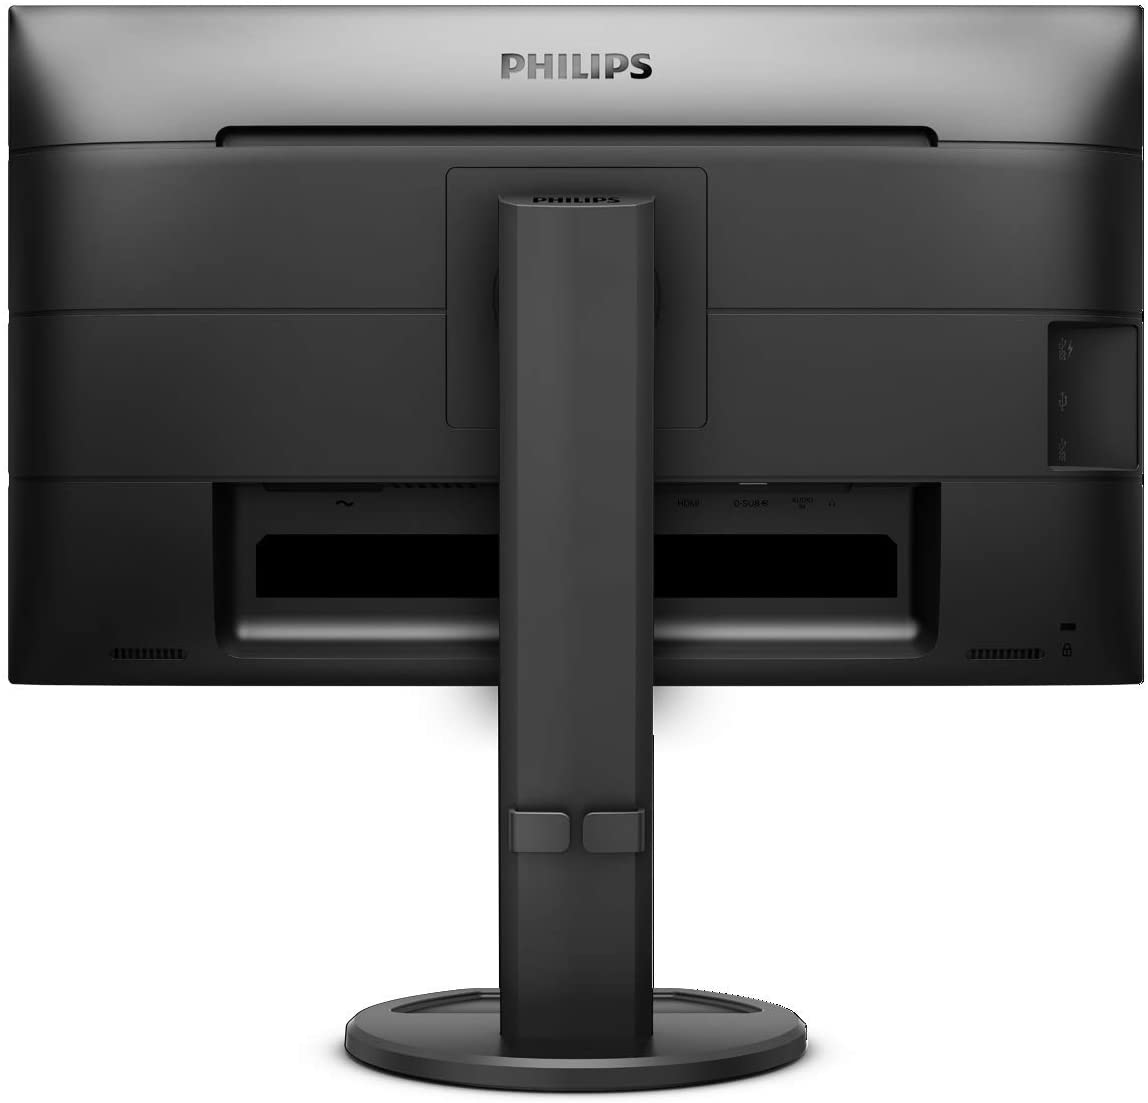 Philips 241B8QJEB 24" Frameless Monitor, Full HD IPS, USB 3.0 hub, Built-in Speakers, VESA, Height Adjustable Stand, TCO Edge, 4Yr Advance Replacement Warranty